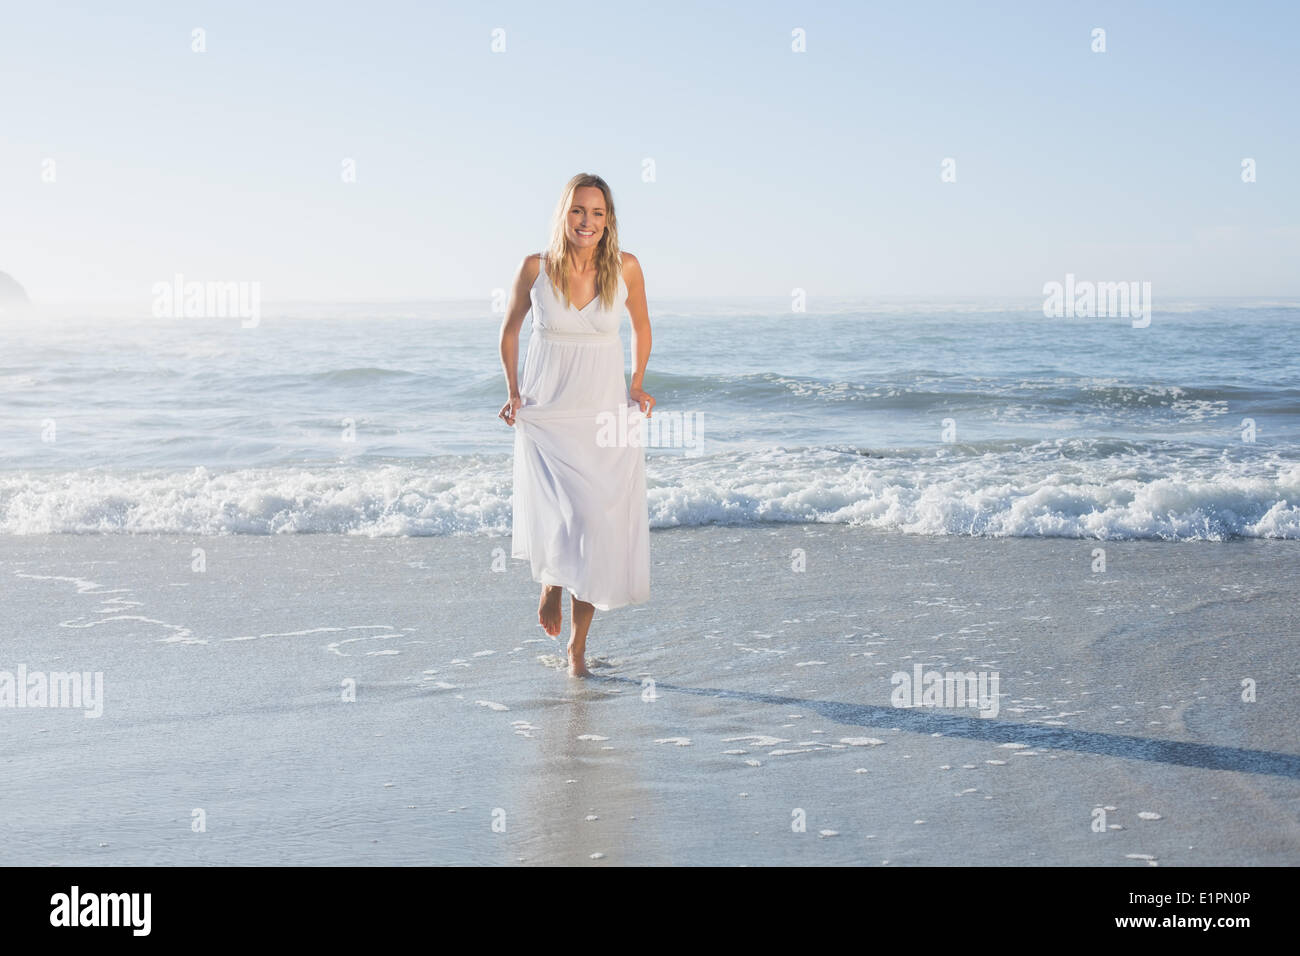 Pretty blonde at the beach in white sundress Stock Photo